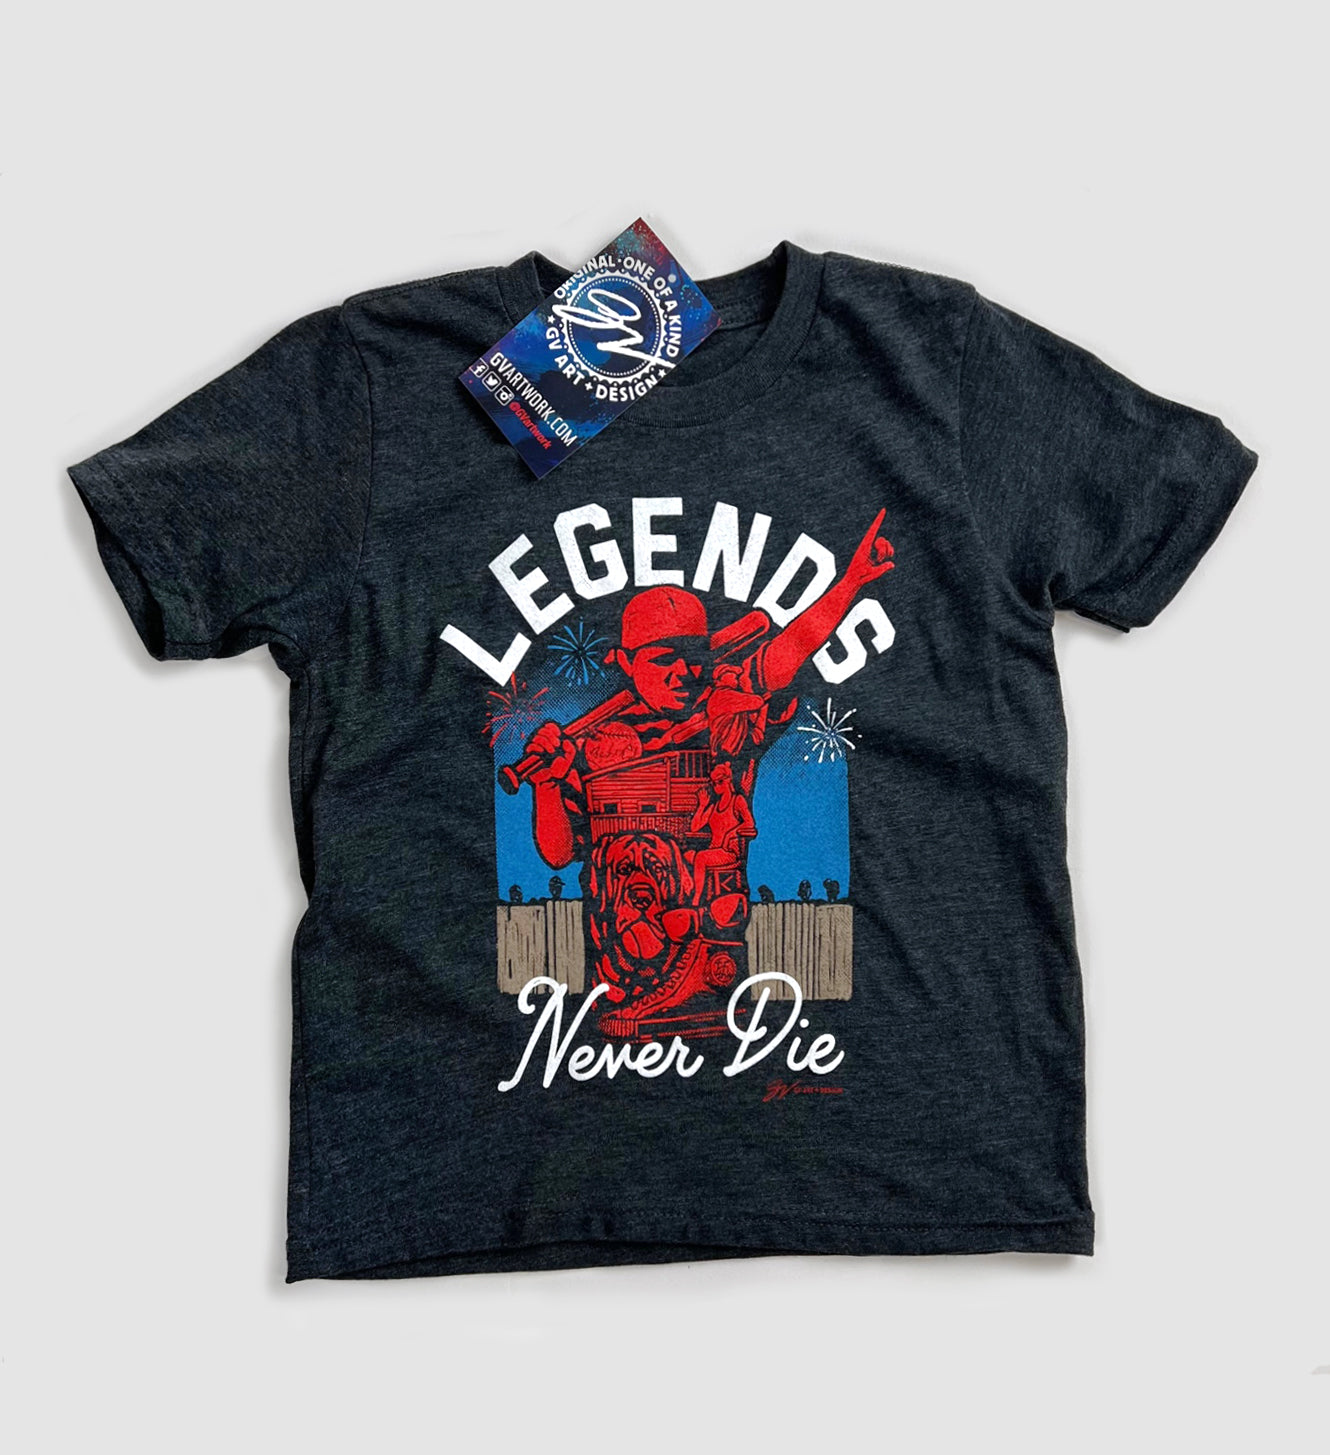 Kids Legends Are Forever T Shirt